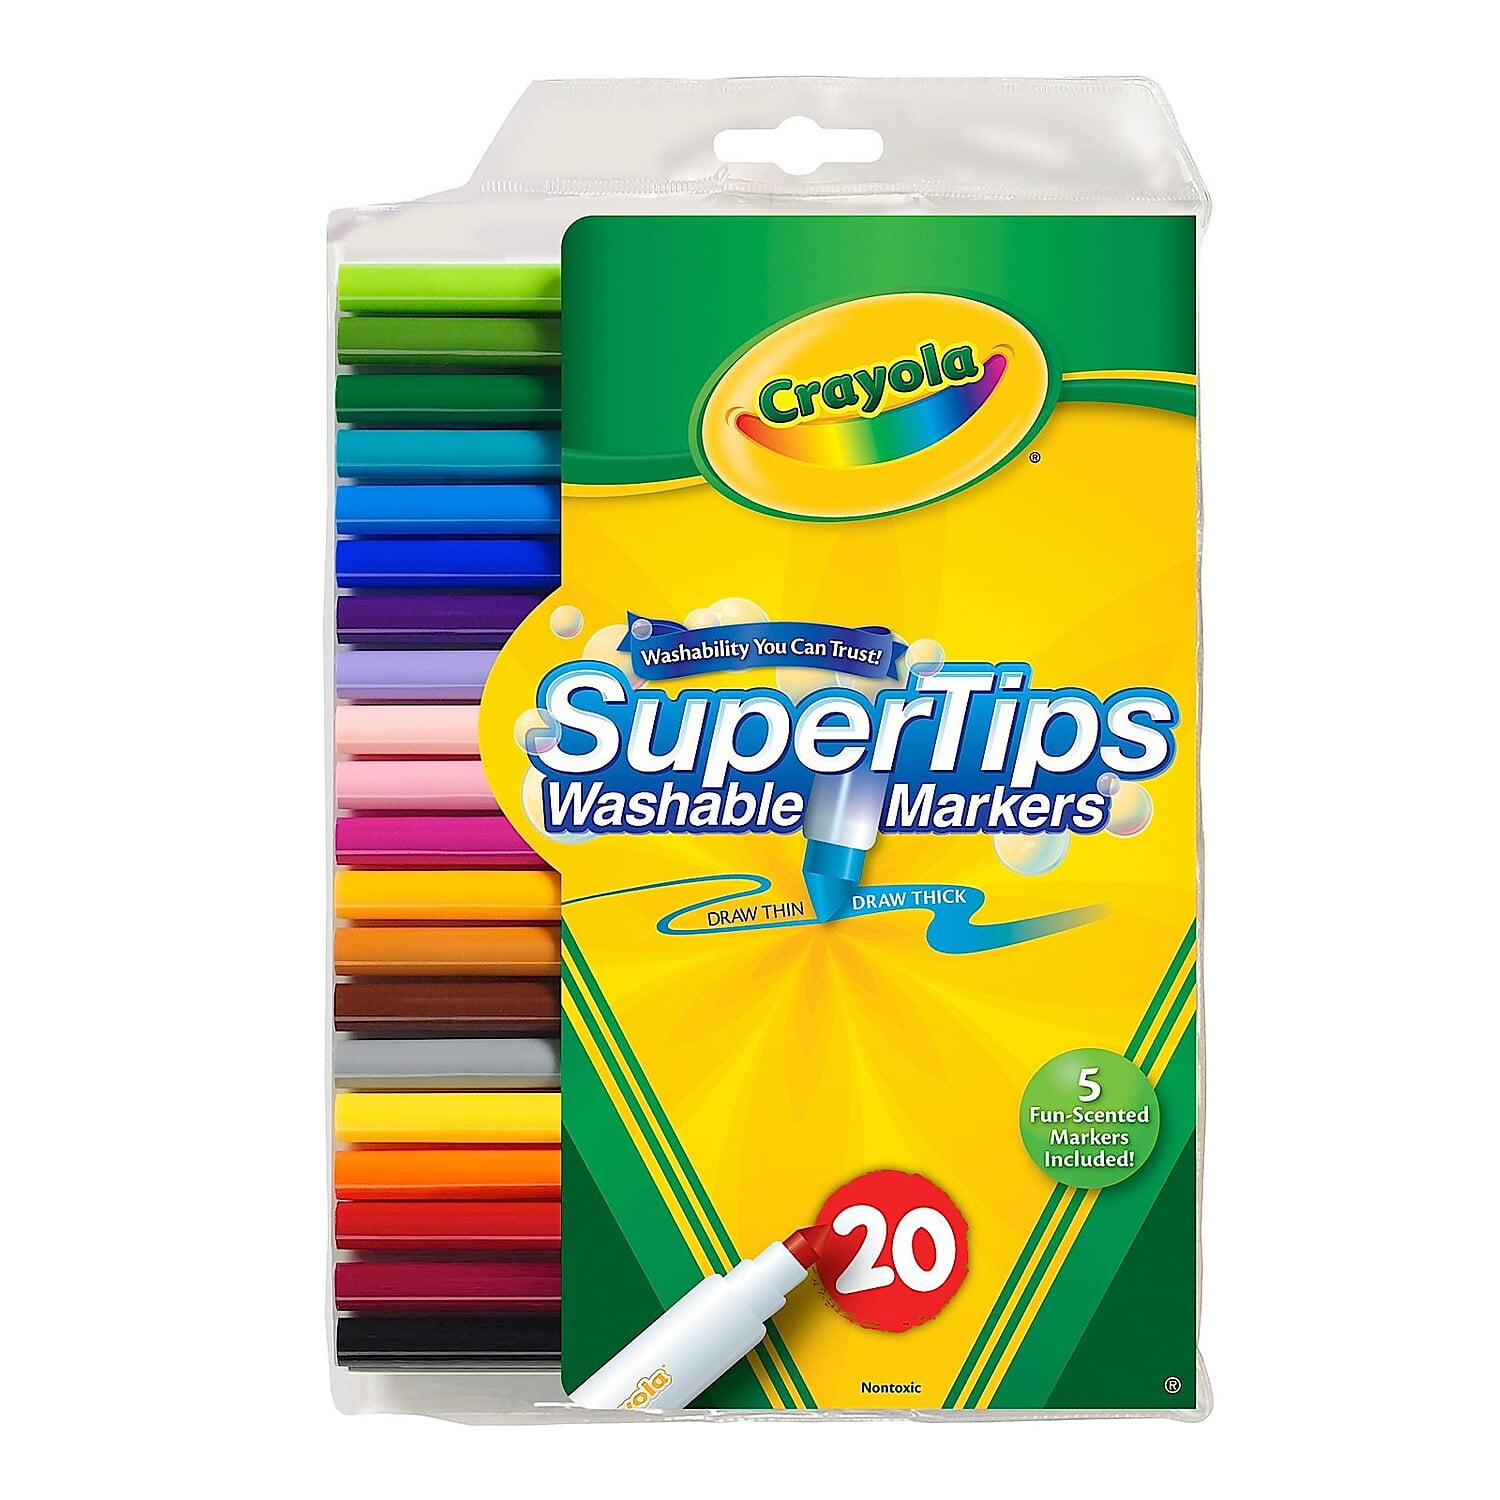 Dropship Crayola 20 Super Tips Washable Markers to Sell Online at